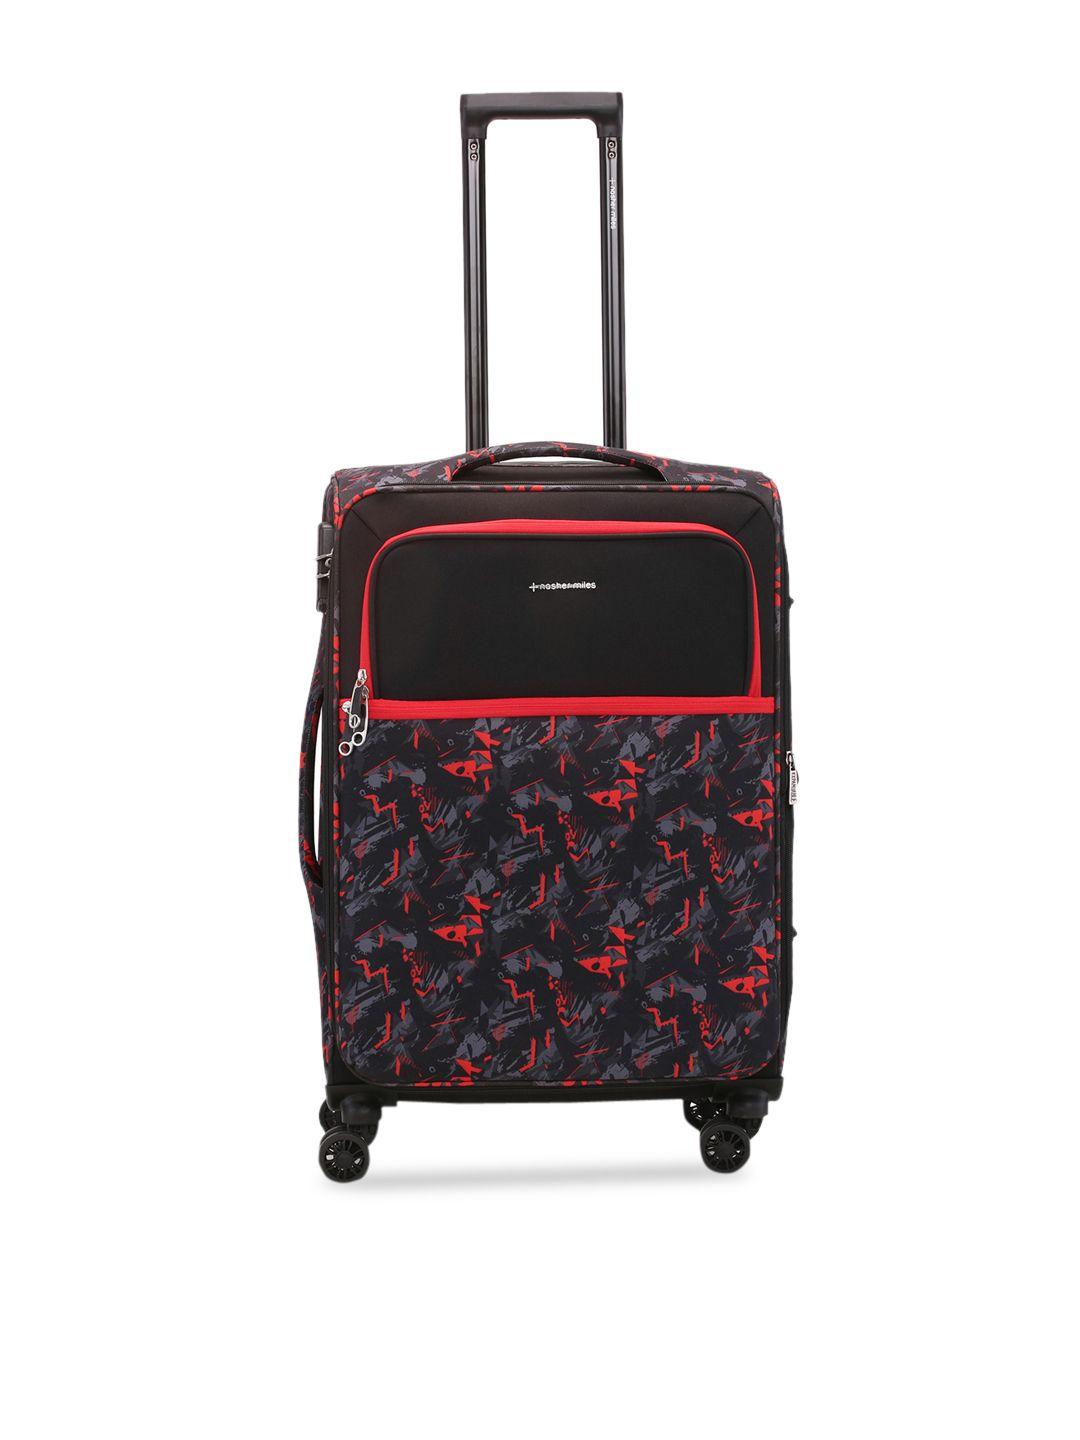 nasher miles unisex water resistant soft-sided cabin trolley suitcase